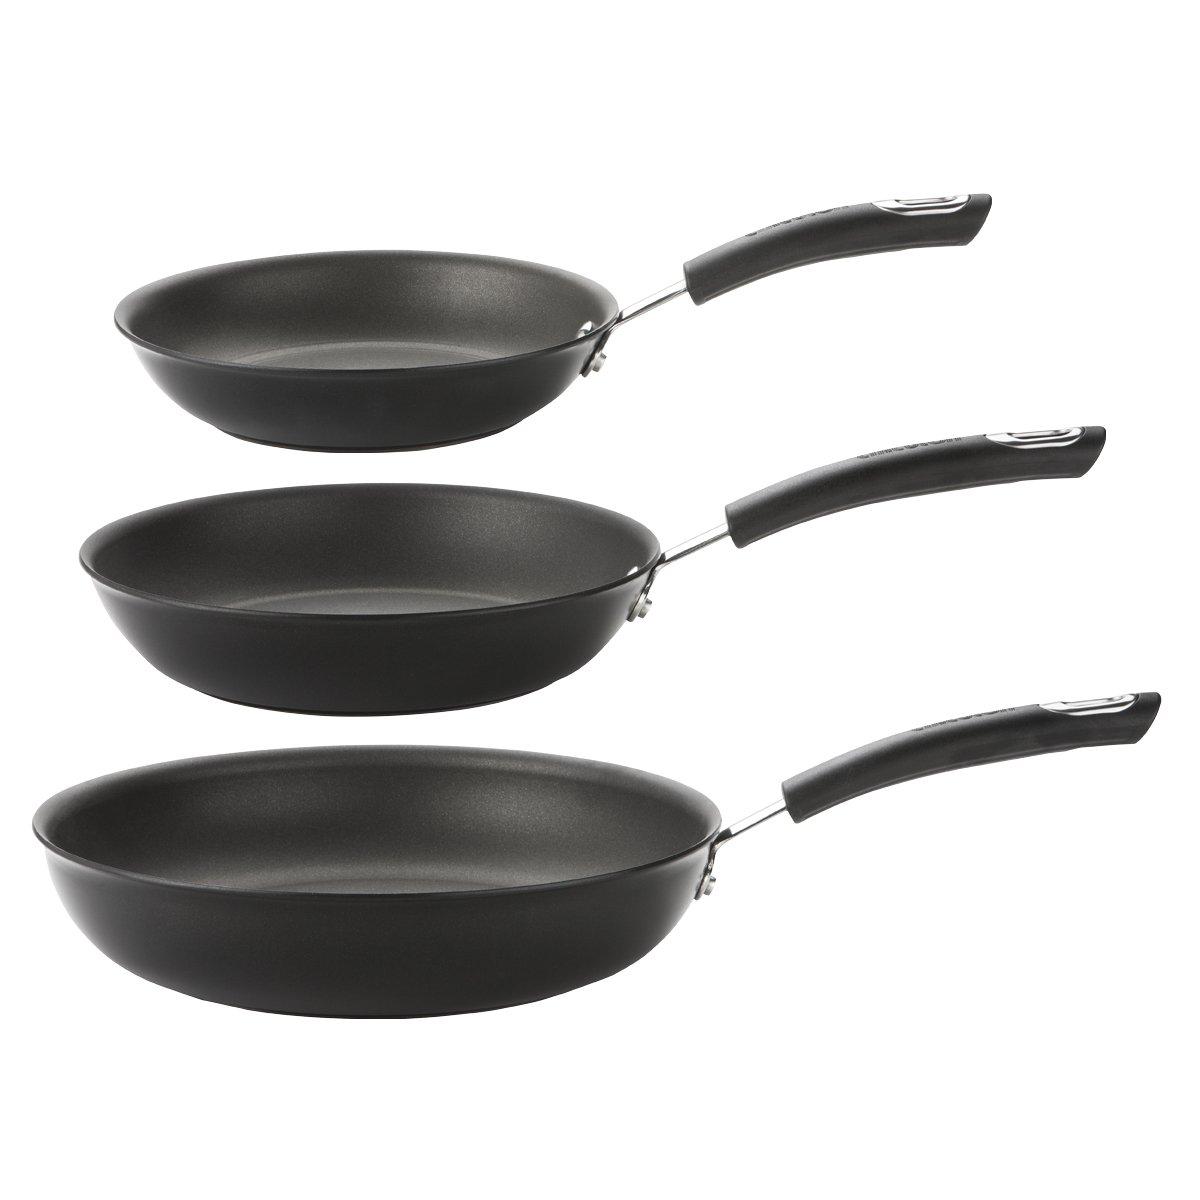 Total Frying Pan Set Non Stick Induction Kitchen Cookware - Pack of 3